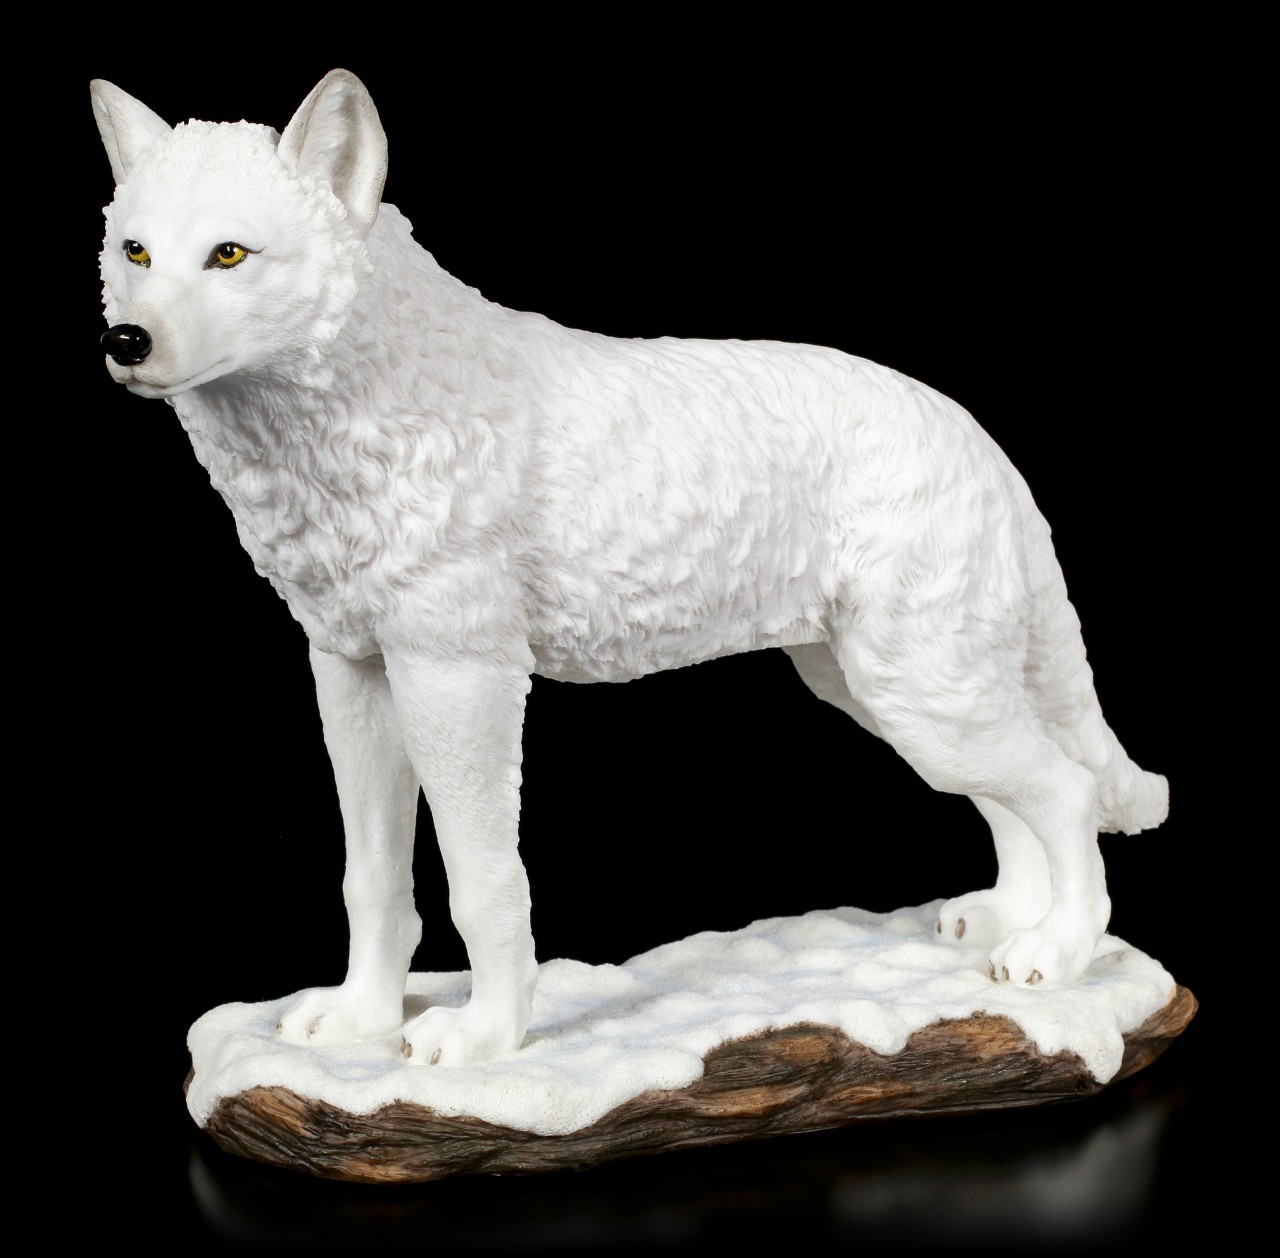 Polar Wolf Figurine is Standing in Snow